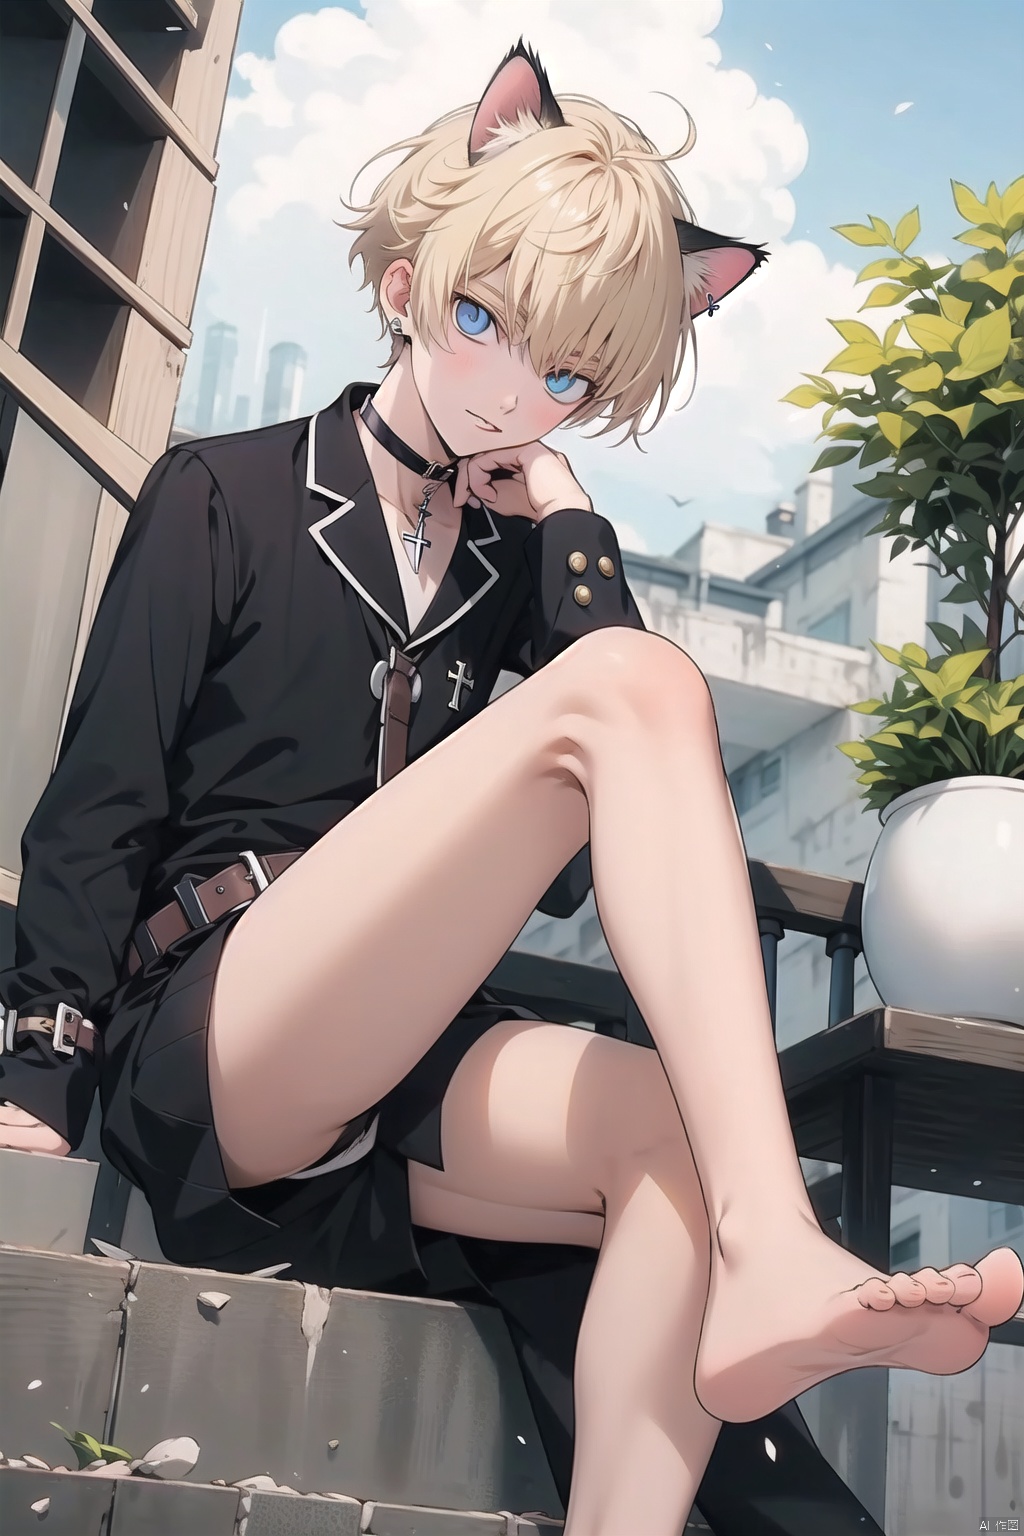  1boy,(18 year old),yellow_hair,cat ears, bare legs,bare_feet,young_human,happiness!,code_geass,home, 1male,slim,sitting onrailing,belt collar,g-string,gothic,scar,cross choker,冷白皮,tongue piercing,饰品